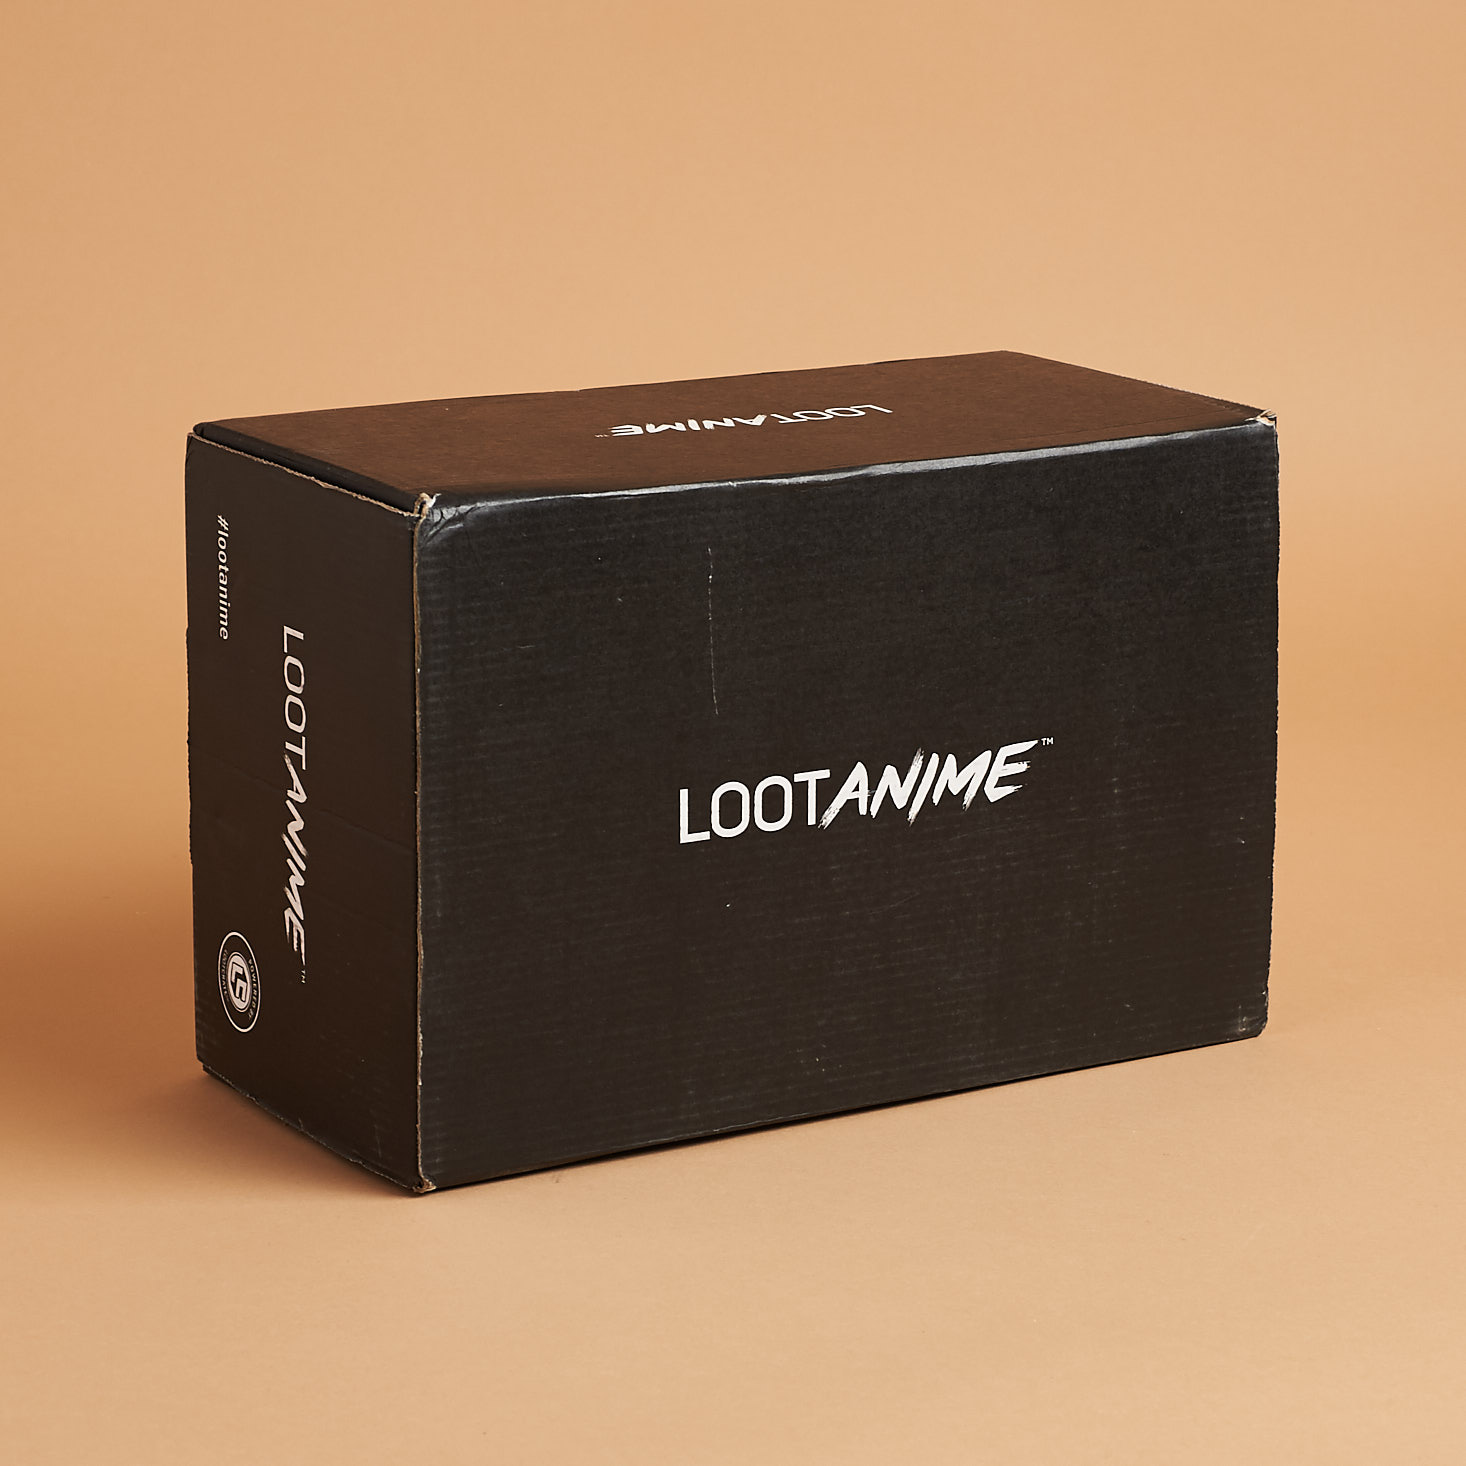 Loot Anime Subscription Box “Tech” Review + Coupon – February 2018